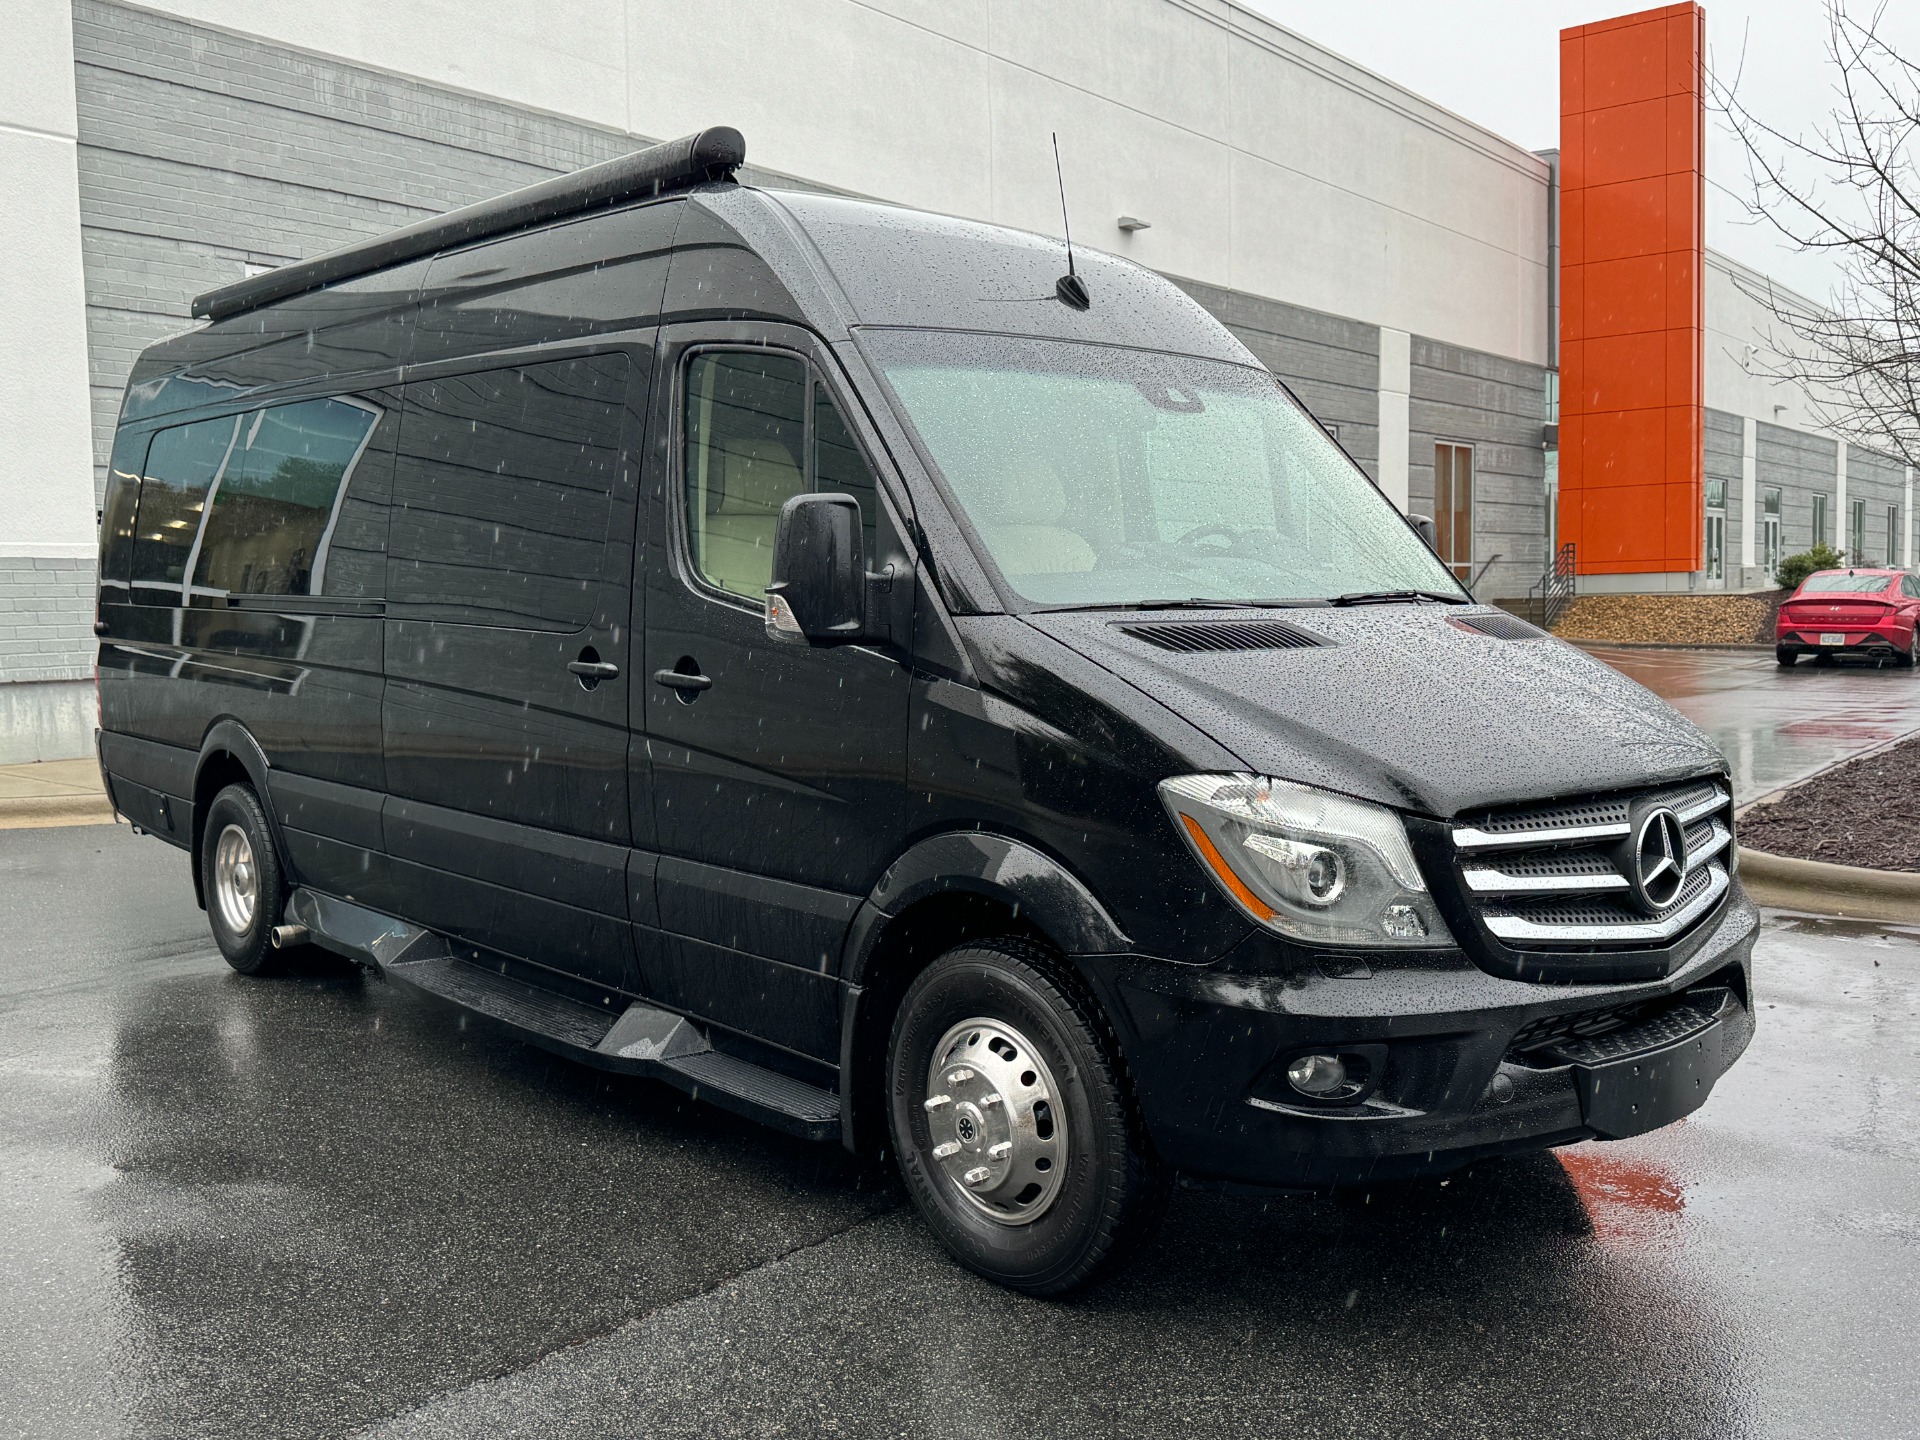 Used 2017 Mercedes-Benz Sprinter Cargo Van MIDWEST JET VAN CONVERSION for sale $120,000 at Formula Imports in Charlotte NC 28227 13